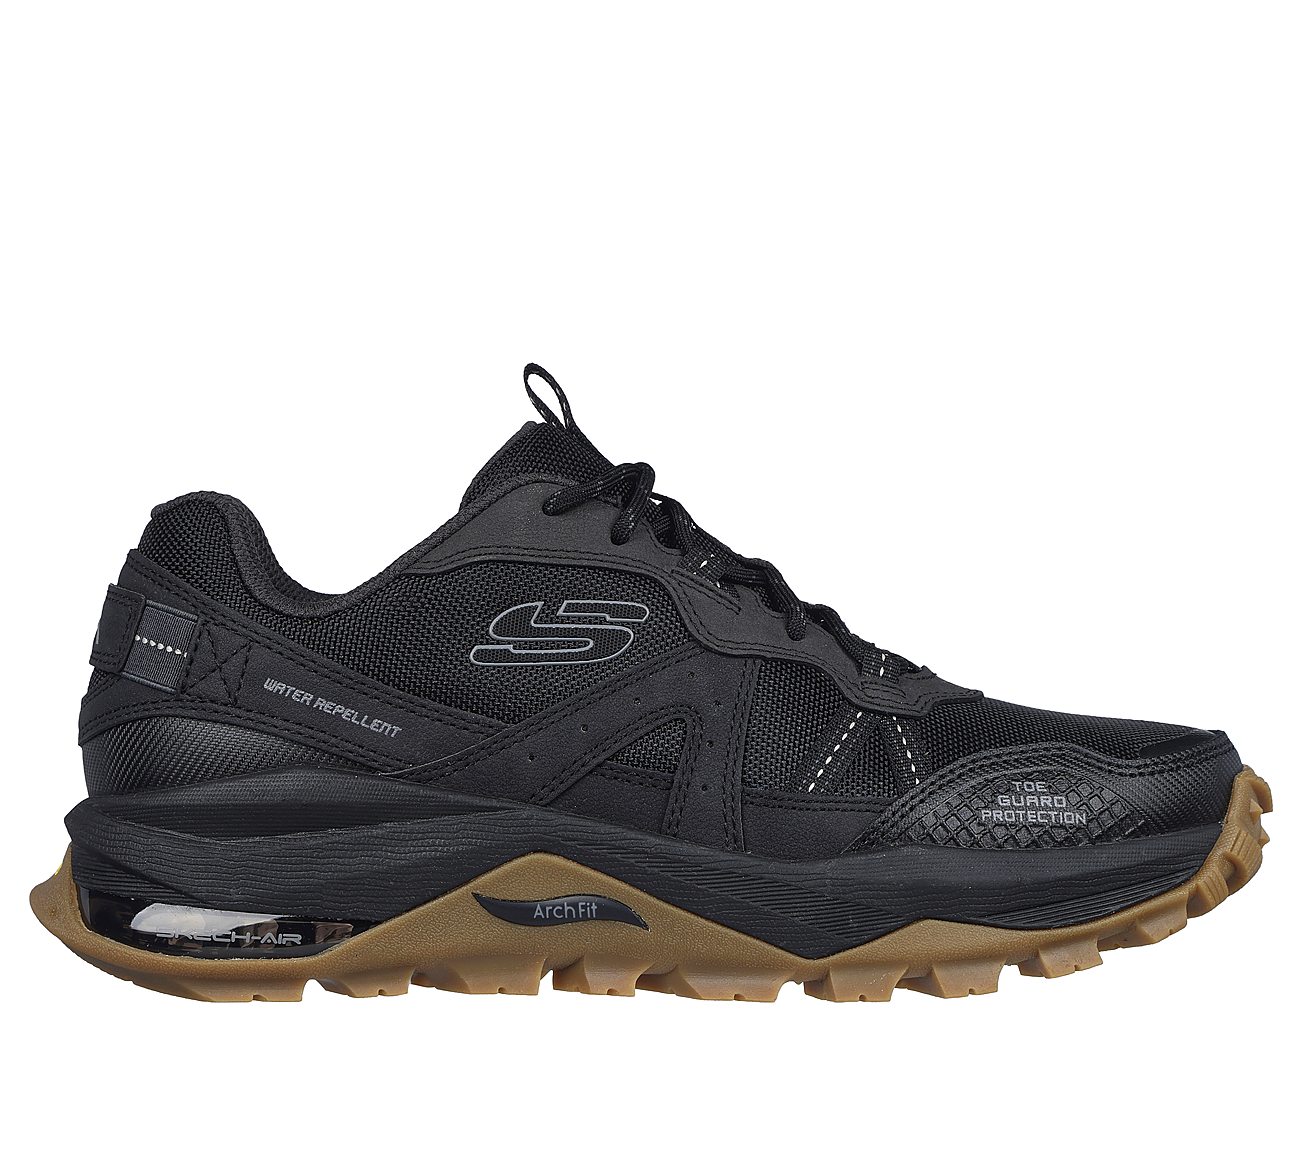 ARCH FIT TRAIL AIR, BBBBLACK Footwear Lateral View